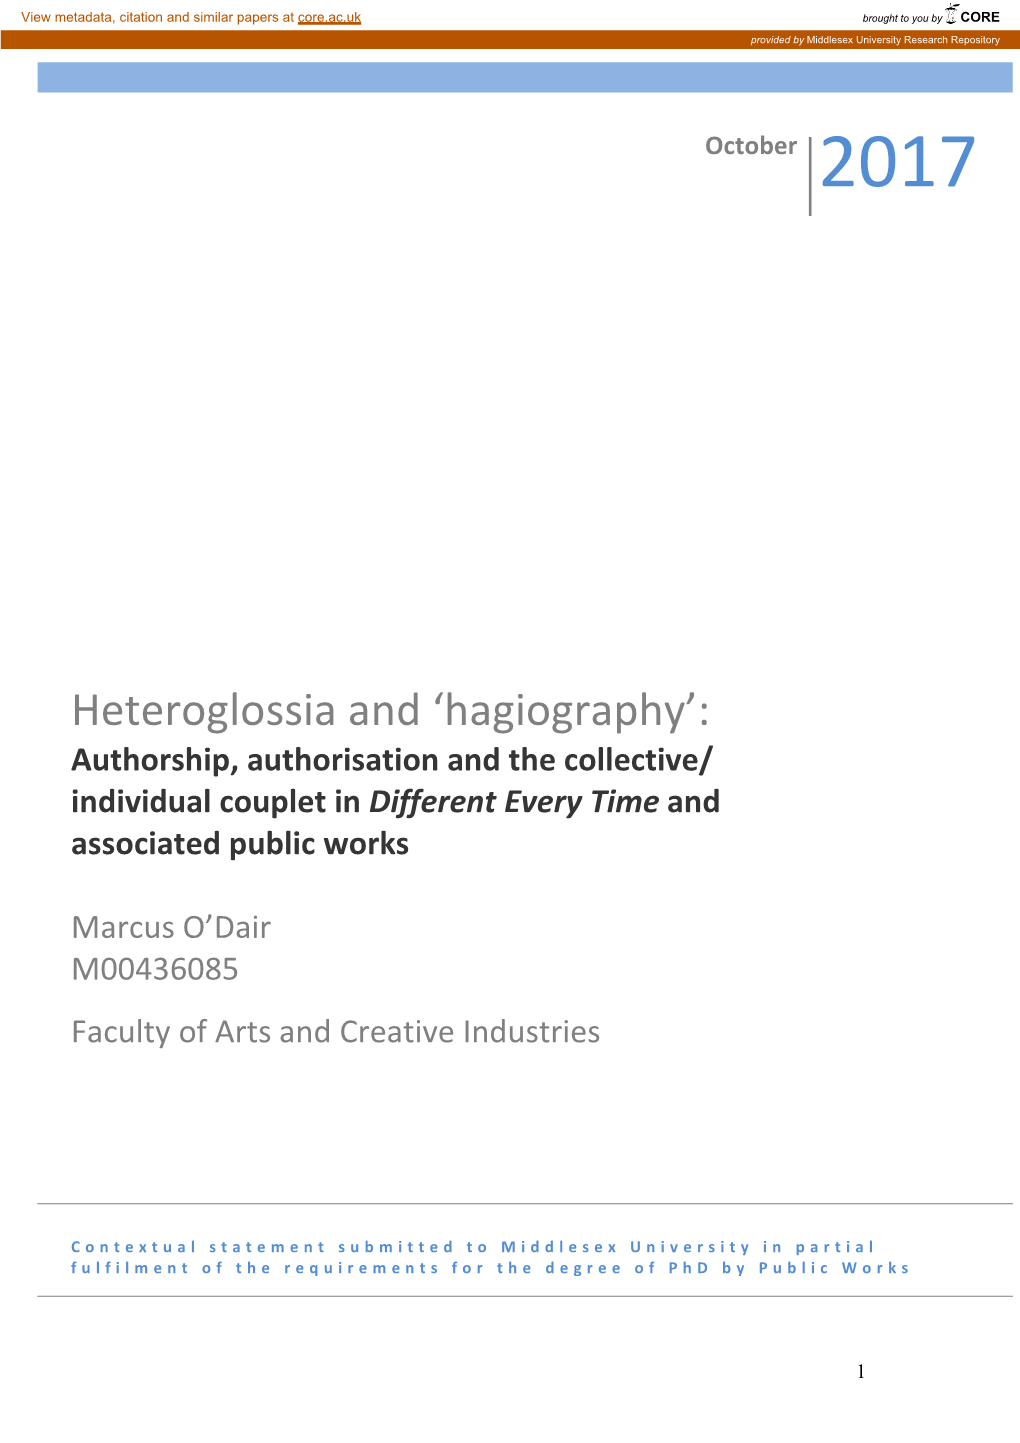 Heteroglossia and ‘Hagiography’: Authorship, Authorisation and the Collective/ Individual Couplet in Different Every Time and Associated Public Works